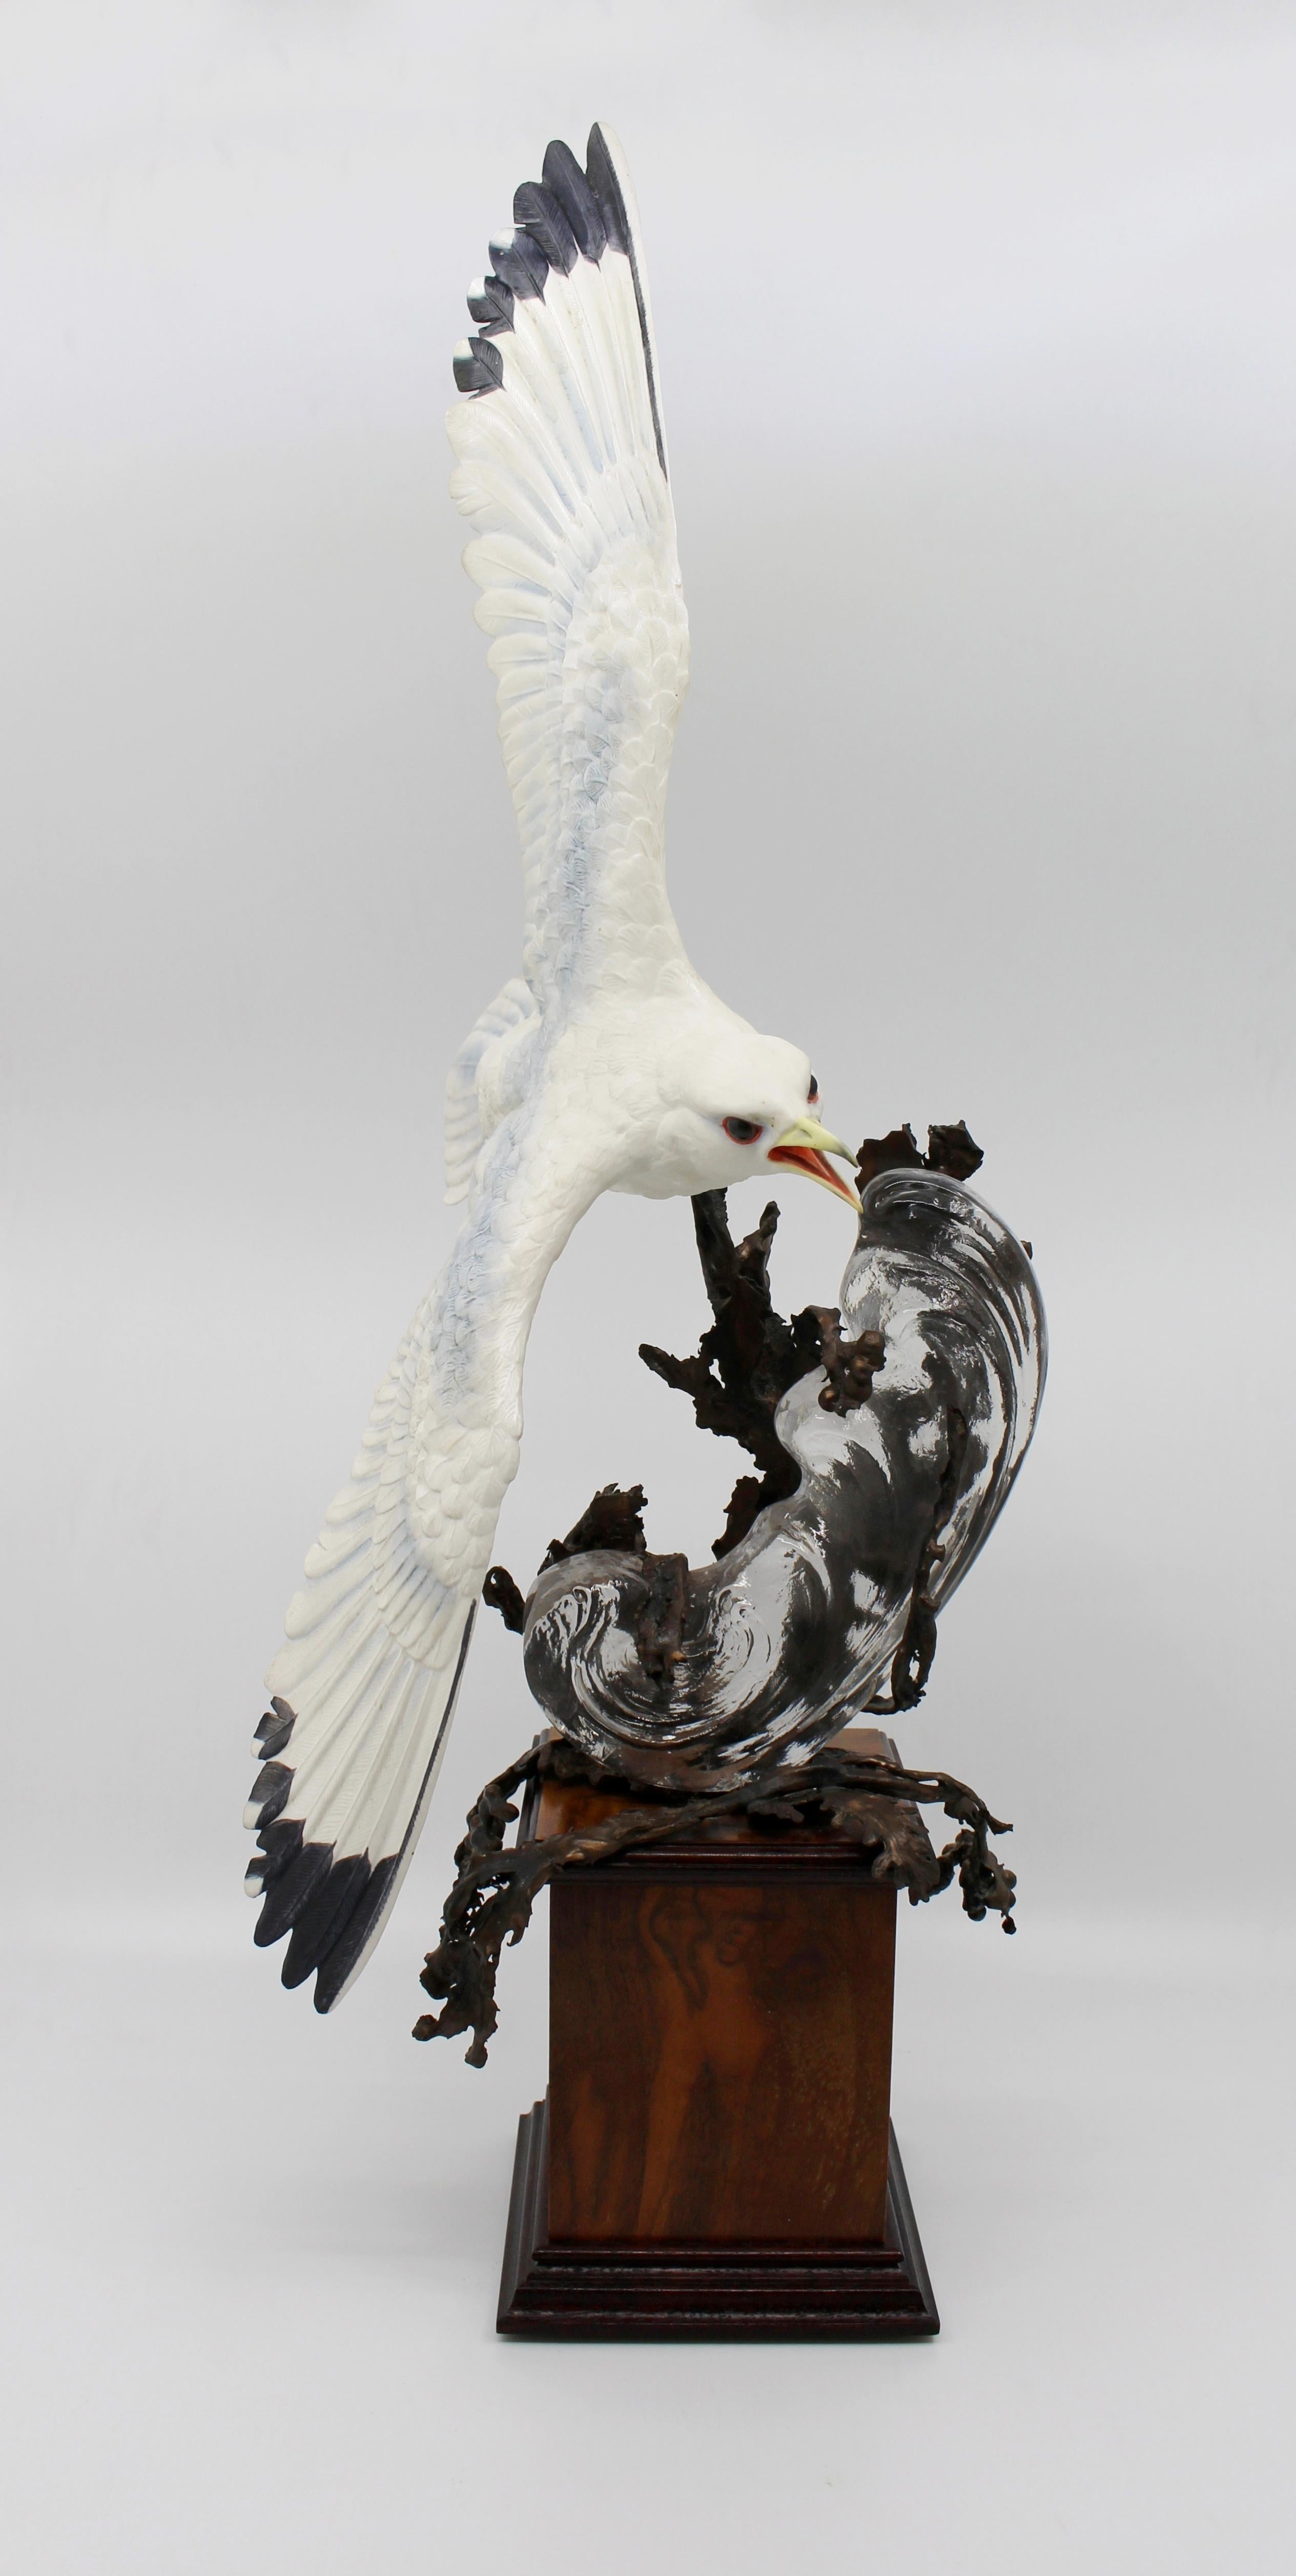 Manufacturer Albany Fine China Ltd England
Title Kittiwake 
Composition porcelain sculpture on bronze mount with marble base
Measures: Height 57 cm / 22 1/2 in
Modeller David Burnham-Smith
Limited Edition Limited edition of 500
Condition: Very